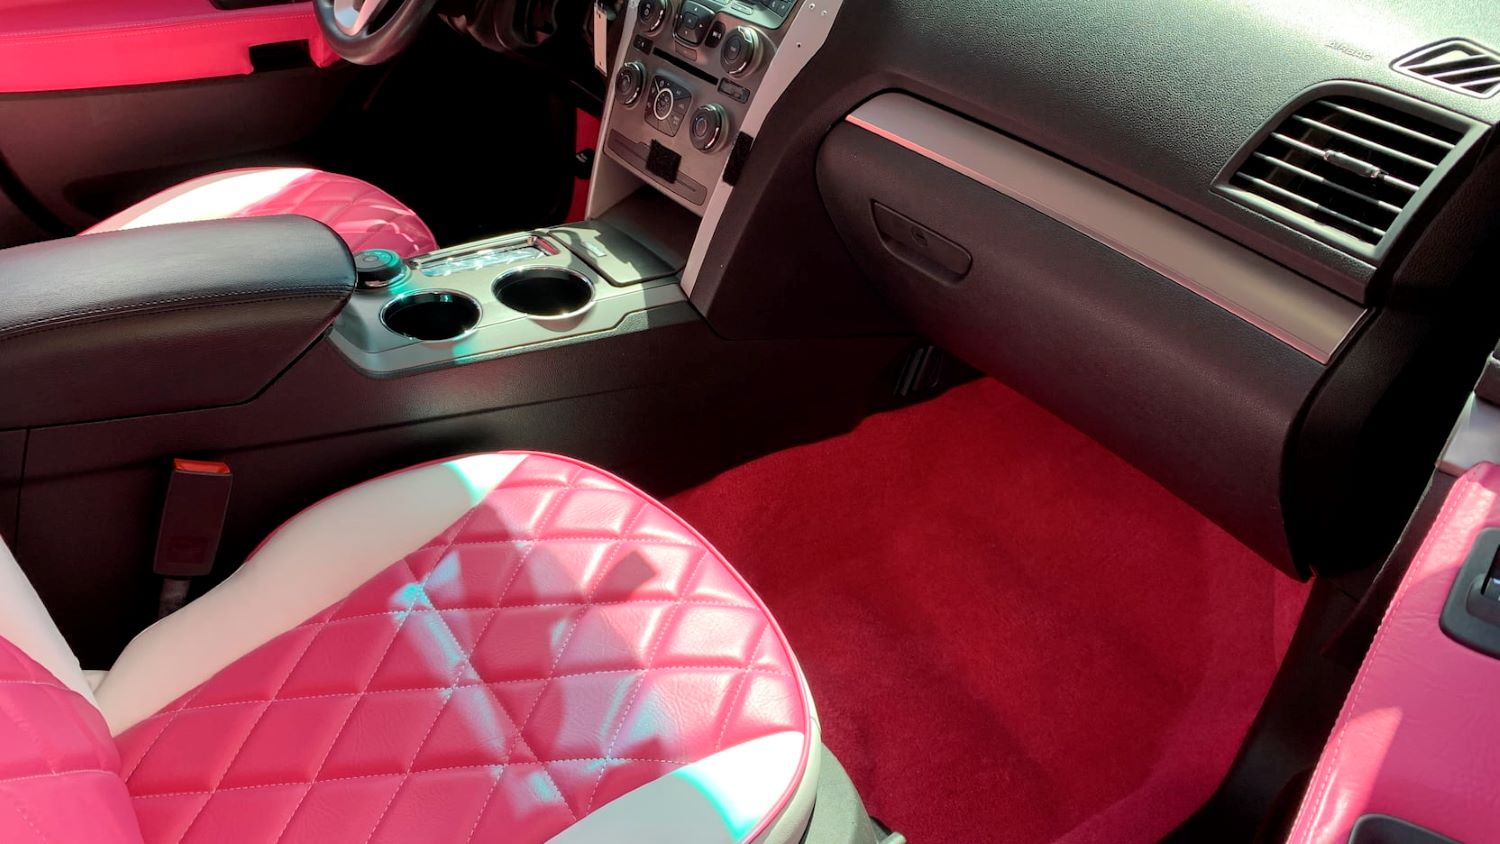 For Around $20,000, This Hot Pink Ford Explorer Interceptor Wants